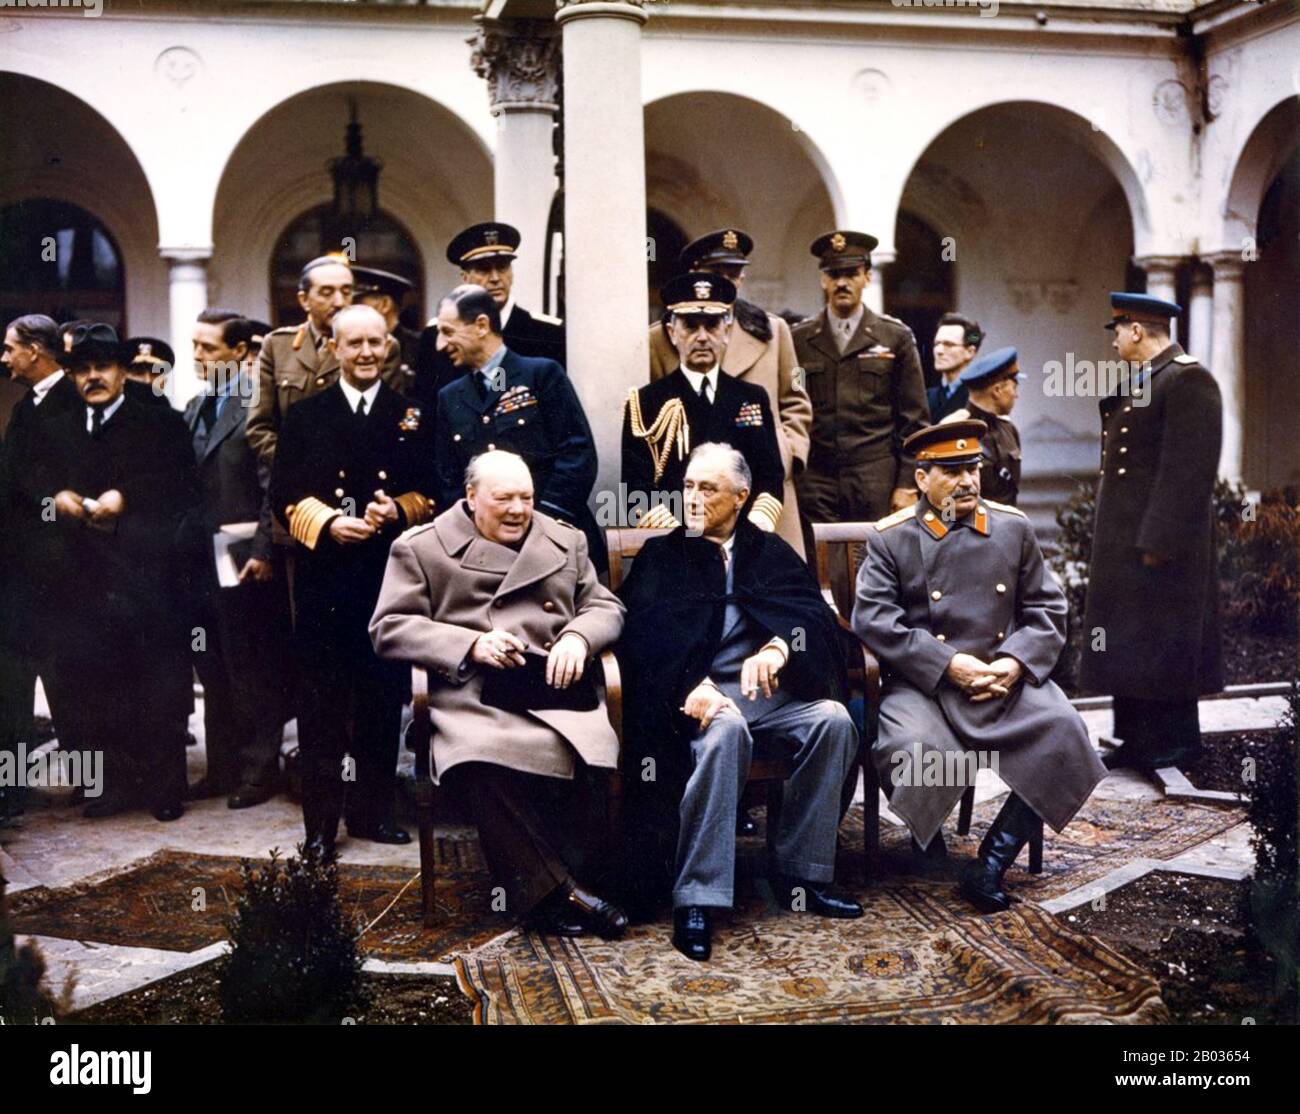 The Yalta Conference, sometimes called the Crimea Conference and codenamed the Argonaut Conference, held February 4–11, 1945, was the World War II meeting of the heads of government of the United States, the United Kingdom and the Soviet Union, represented by President Franklin D. Roosevelt, Prime Minister Winston Churchill and Premier Joseph Stalin, respectively, for the purpose of discussing Europe's post-war reorganization. The conference convened in the Livadia Palace near Yalta in Crimea.  The meeting was intended mainly to discuss the re-establishment of the nations of war-torn Europe. W Stock Photo